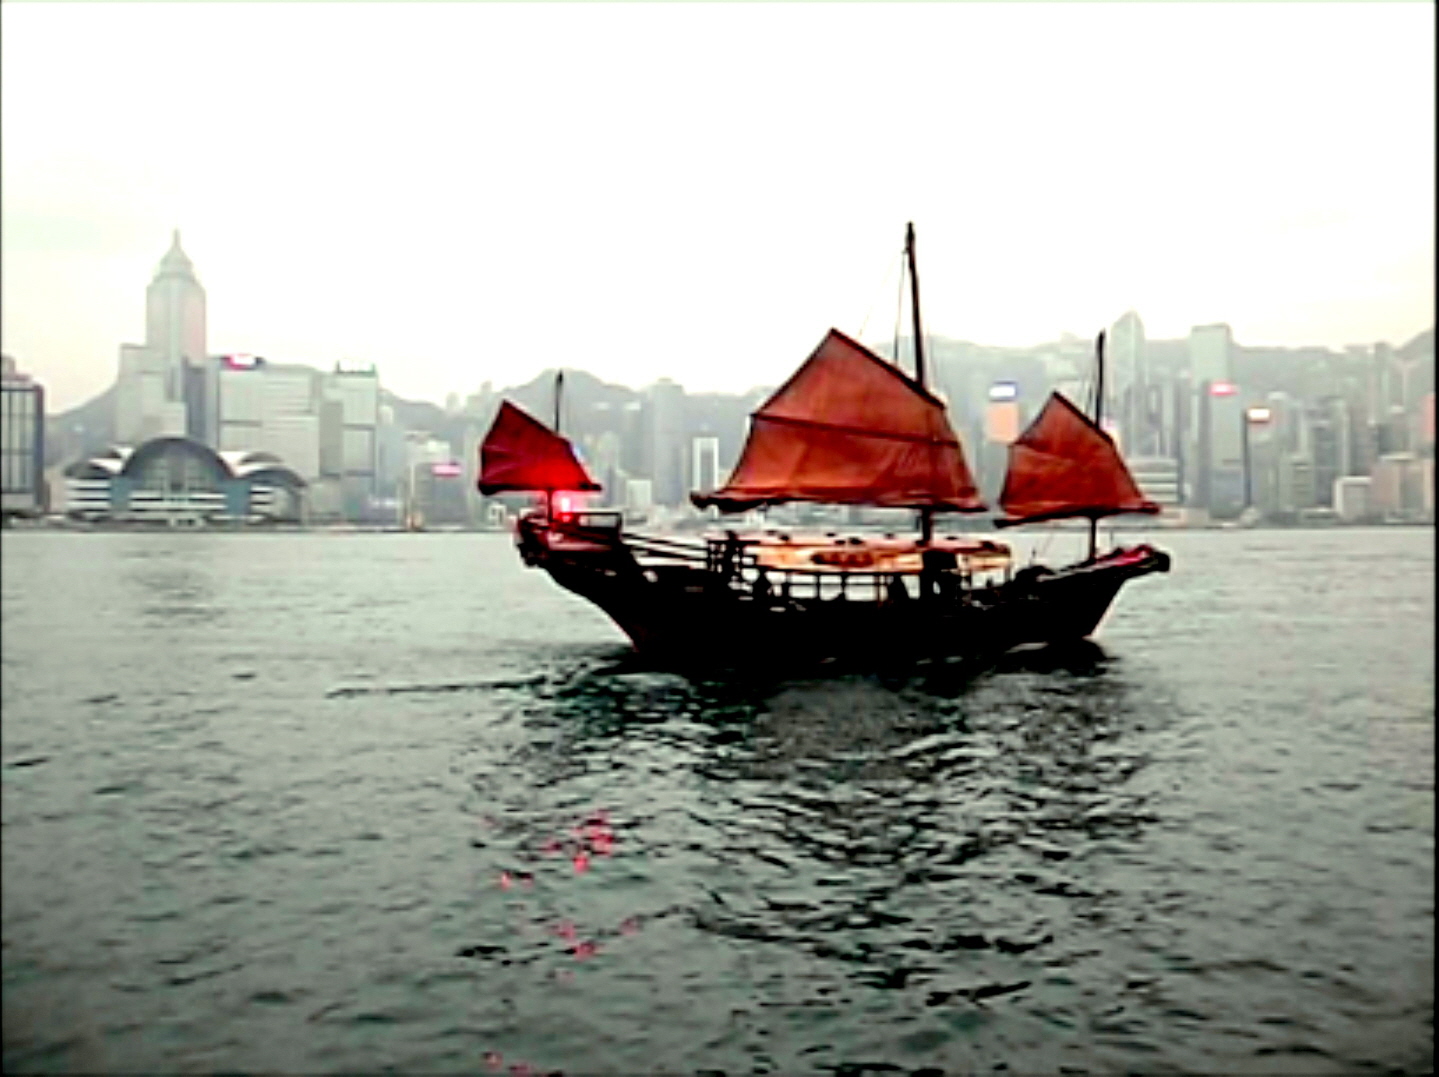 Old Fashioned Junk in Harbor - Hong Kong Skyline (Still taken from Video)